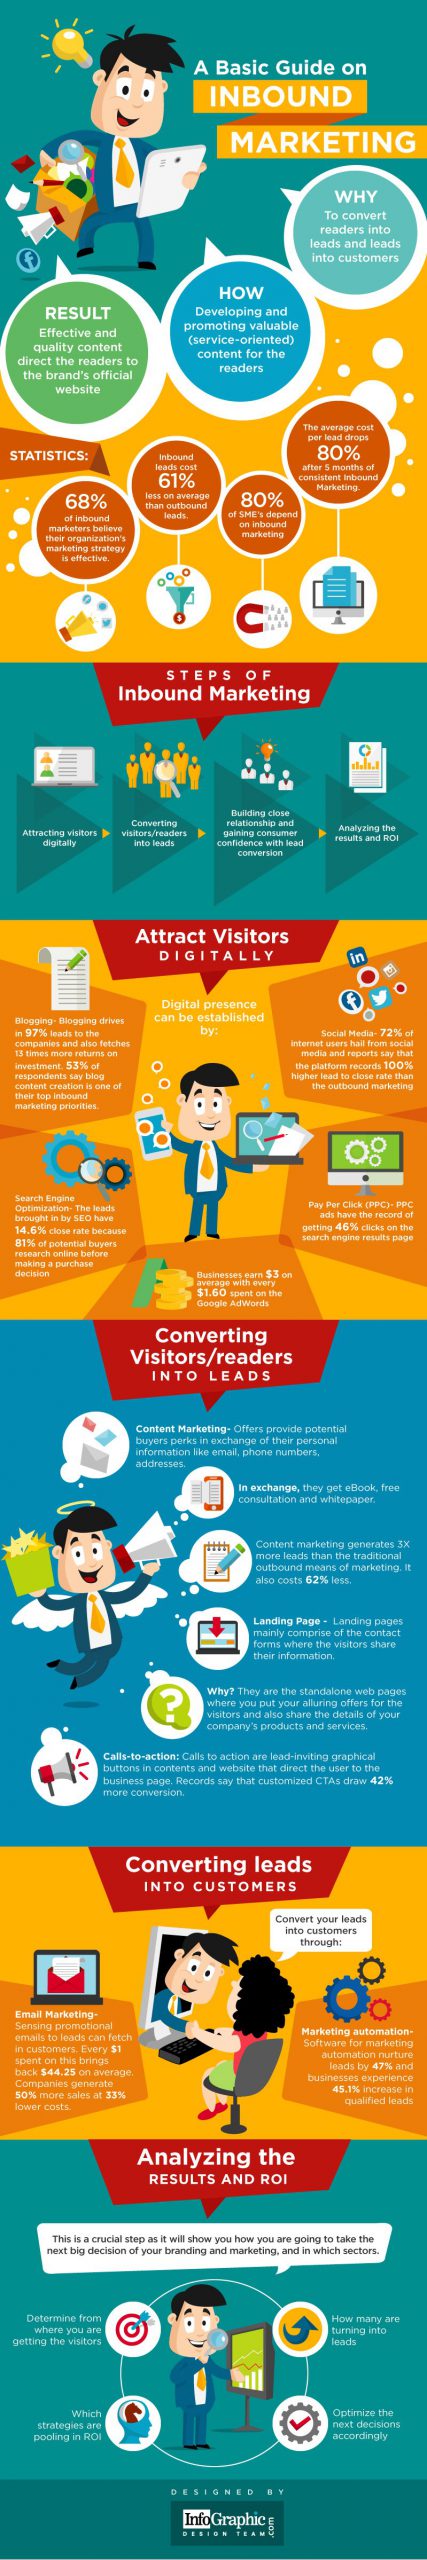 how to attract and convert website visitors using an inbound marketing strategy infographic scaled 1